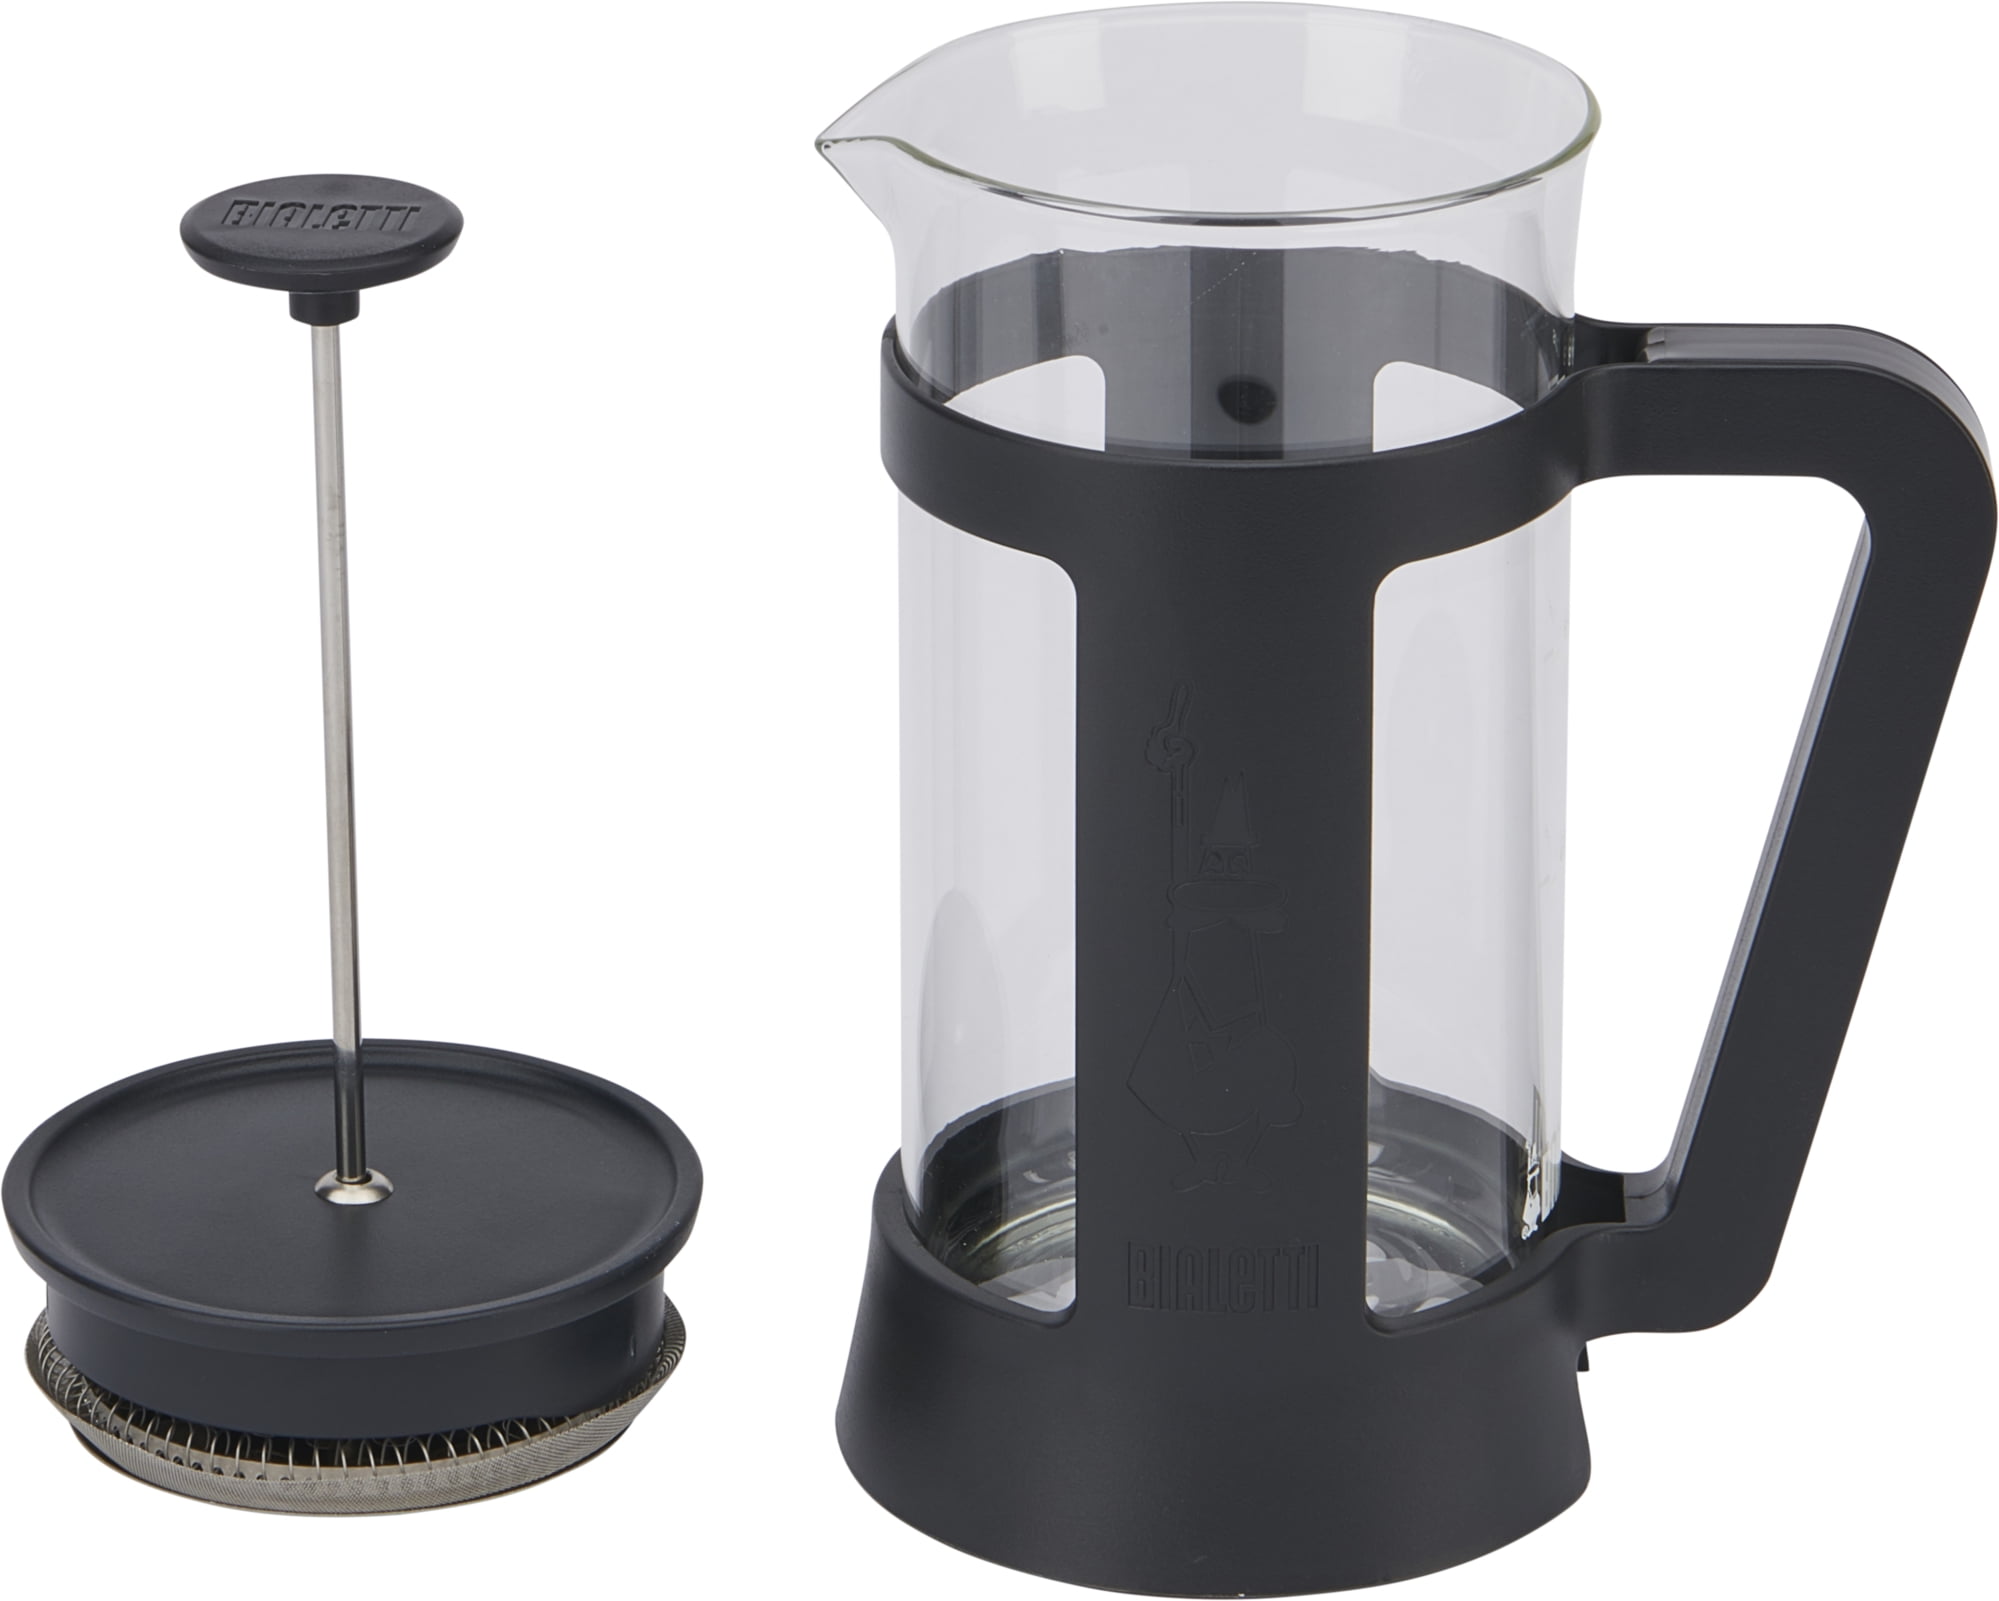 Bialetti Coffee Press Smart, French Press for coffee or tea, borosilicate  glass container, dishwasher safe, 1 L - 34 Oz (8-cup), Black